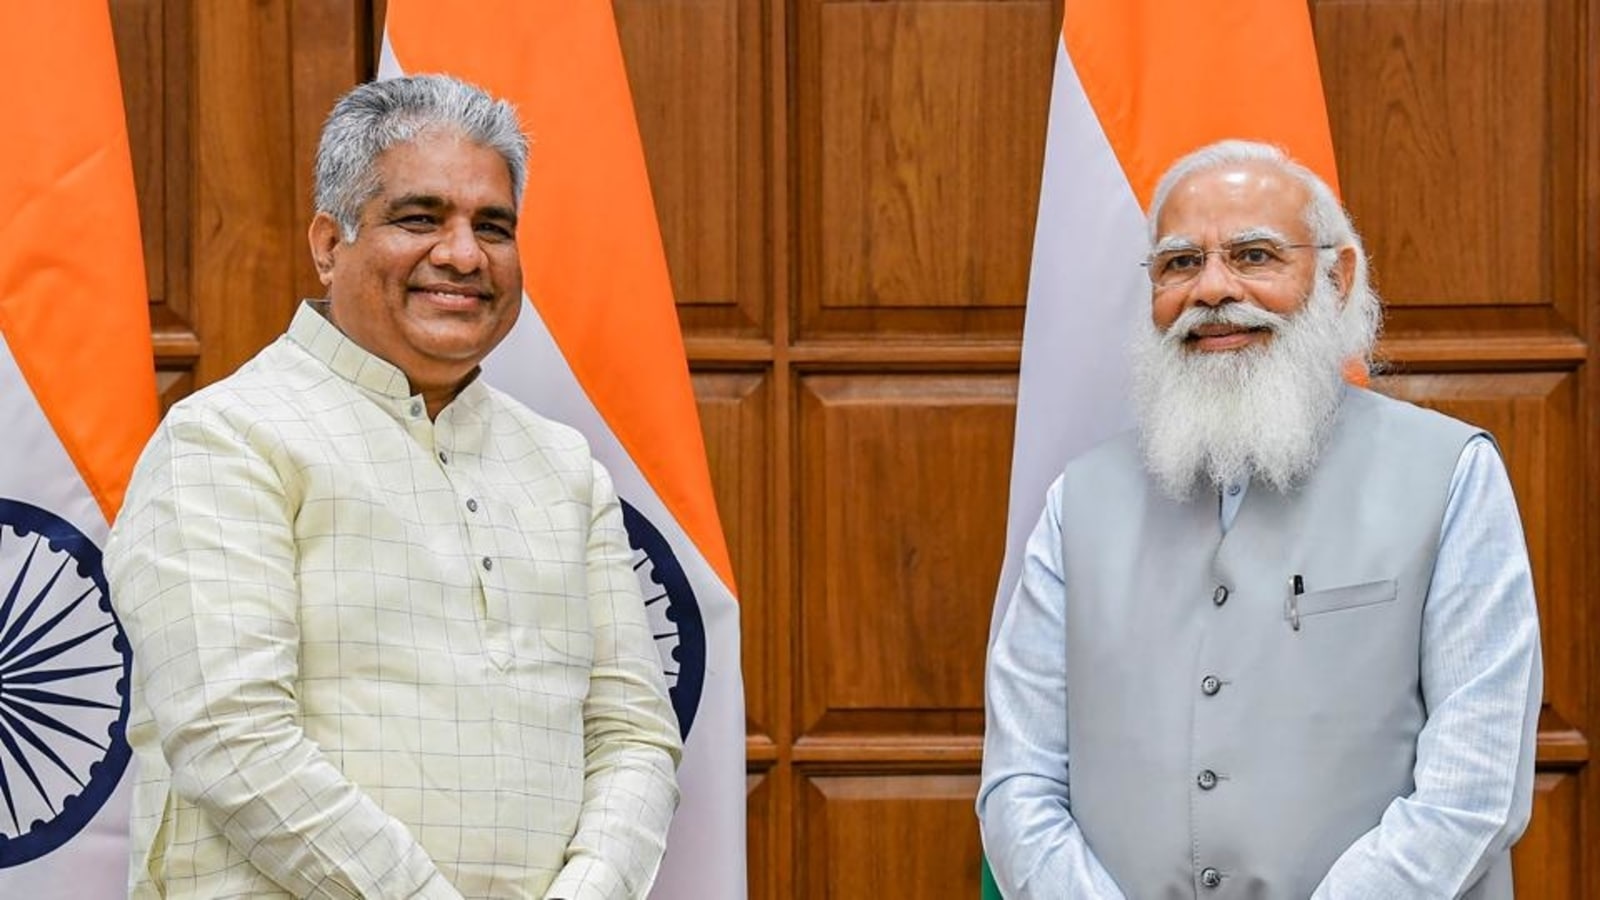 Experts count on Bhupender Yadav to tackle environmental challenges | Latest News India - Hindustan Times.union minister